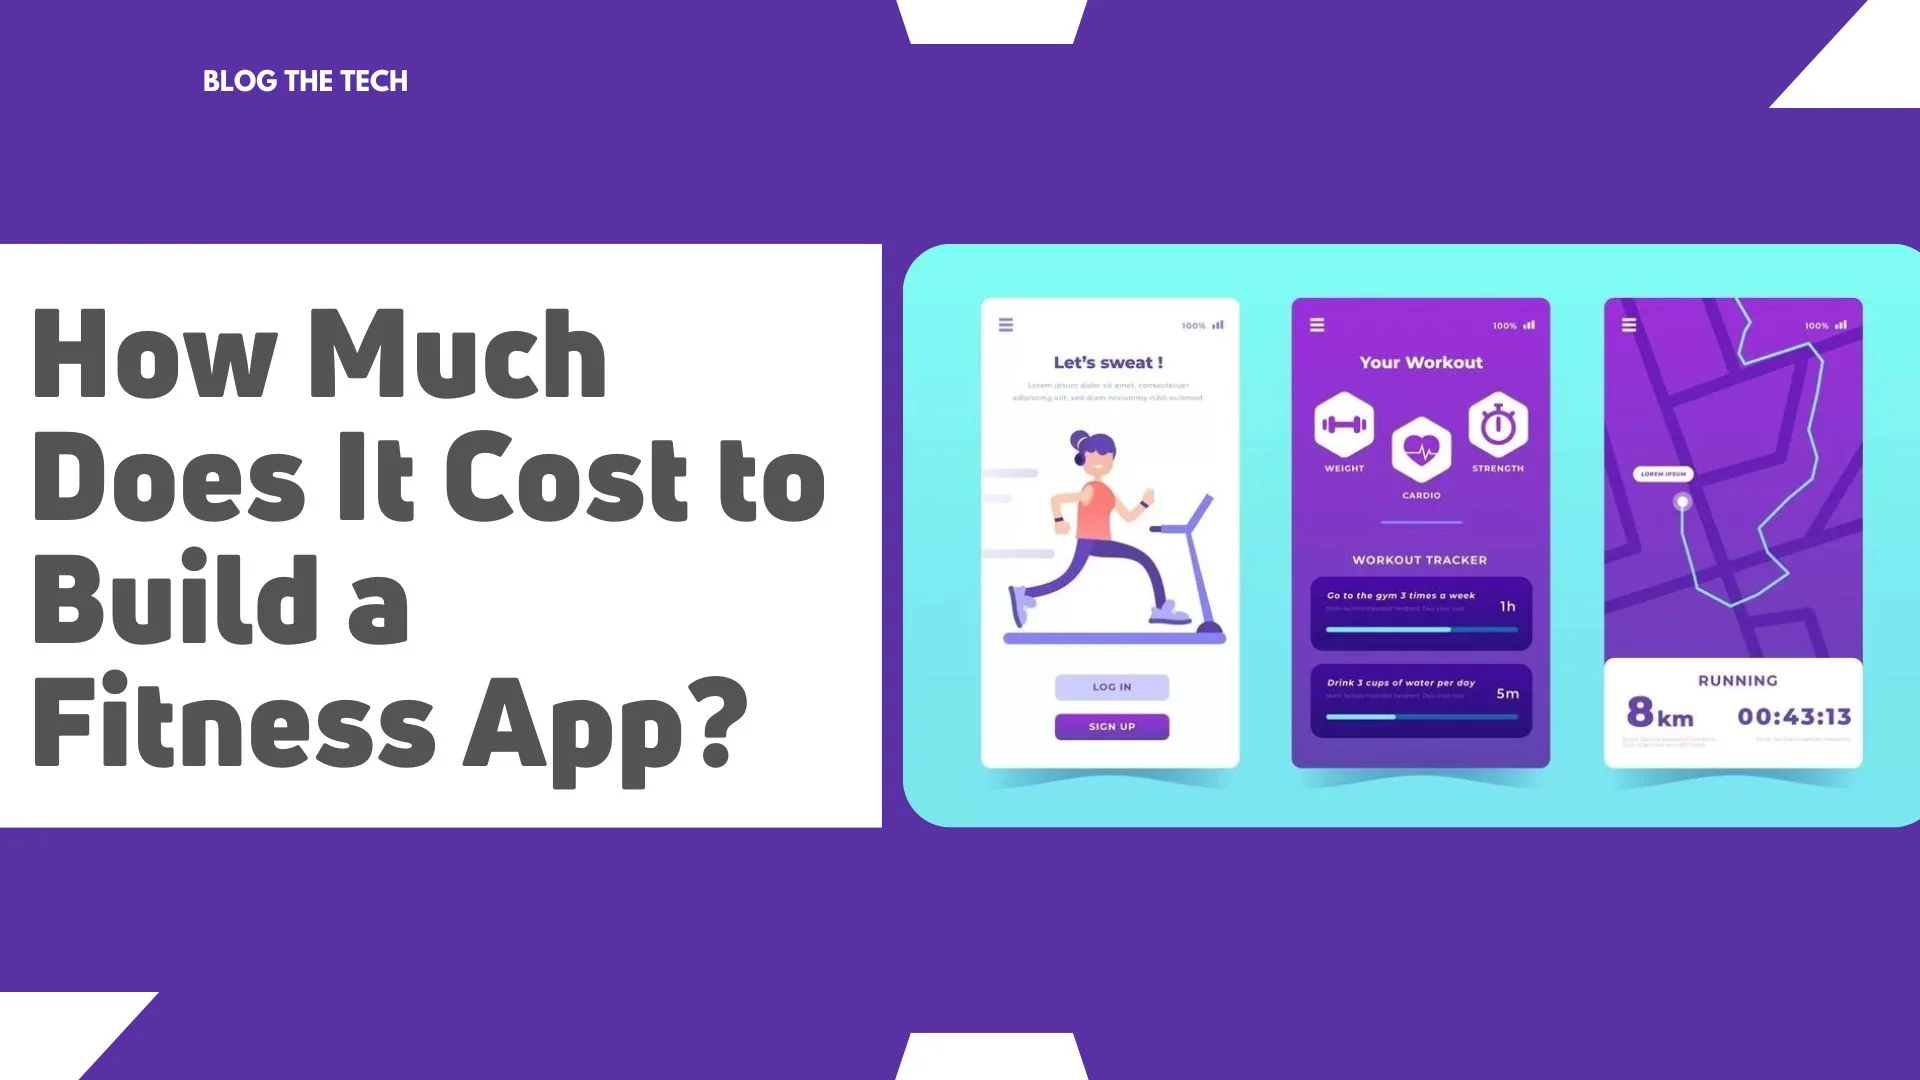 How Much Does It Cost to Build a Fitness App?